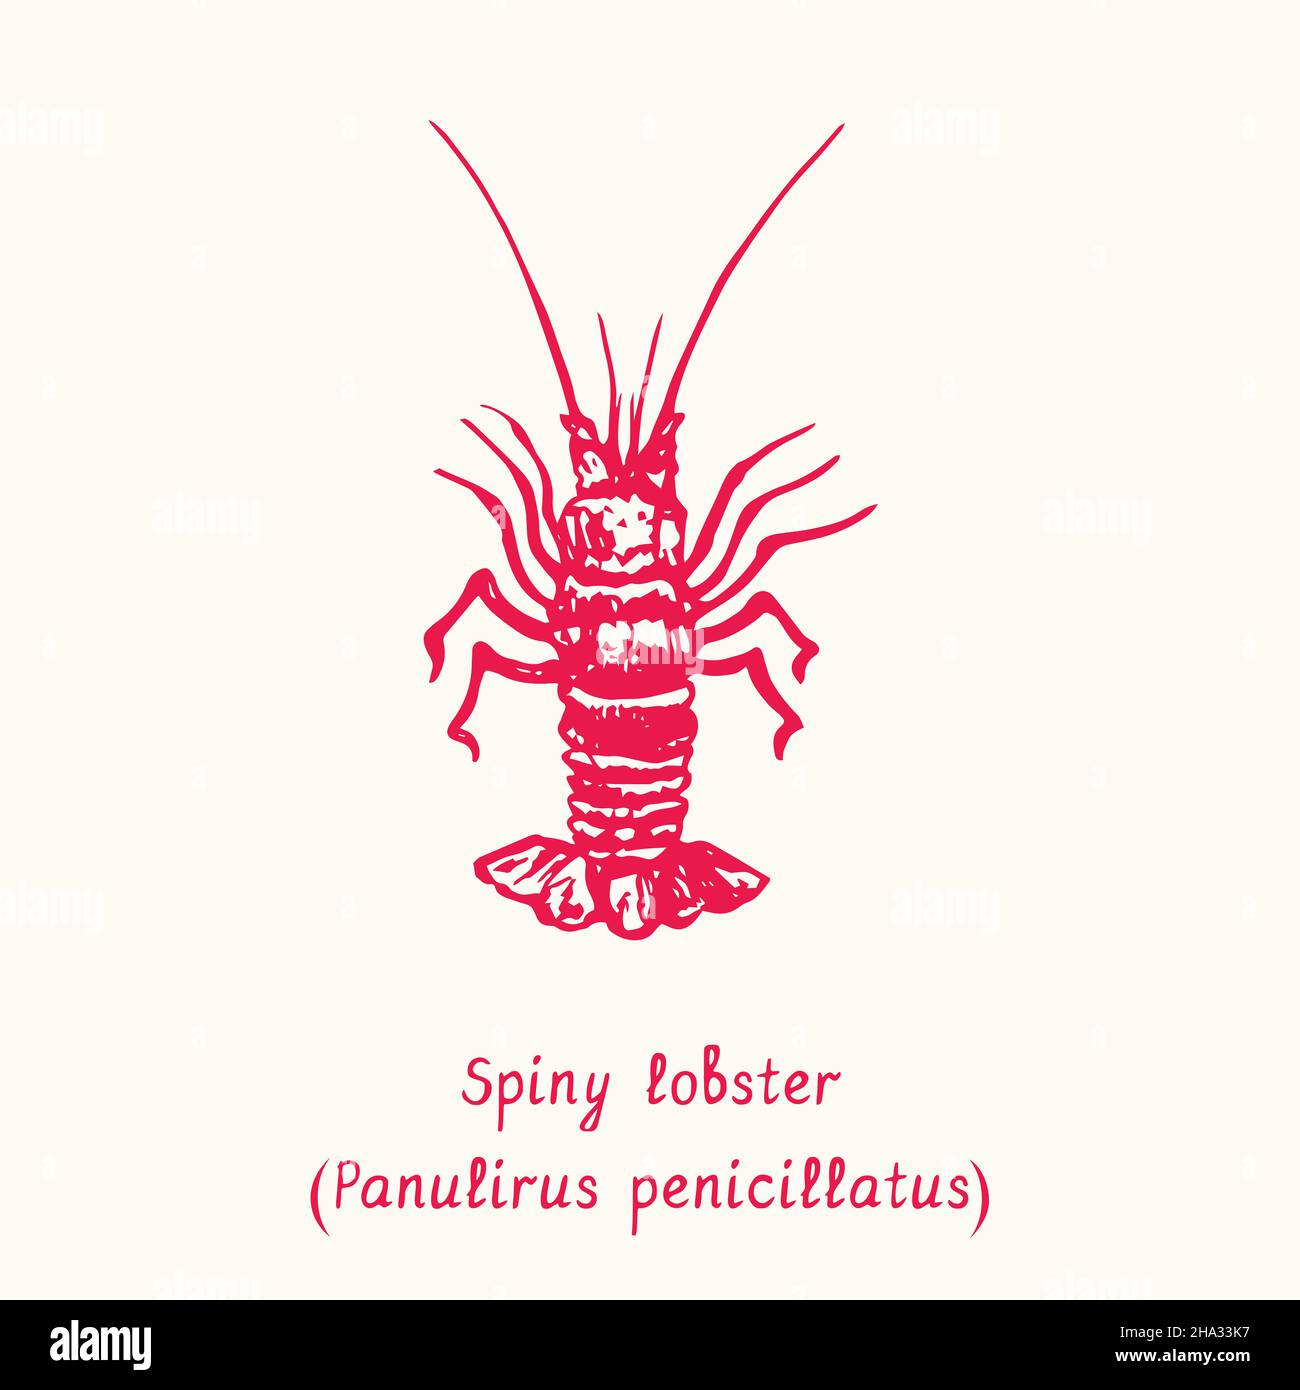 Spiny Lobster (Panulirus penicillatus). Ink black and white doodle drawing in woodcut style with inscription. Stock Photo